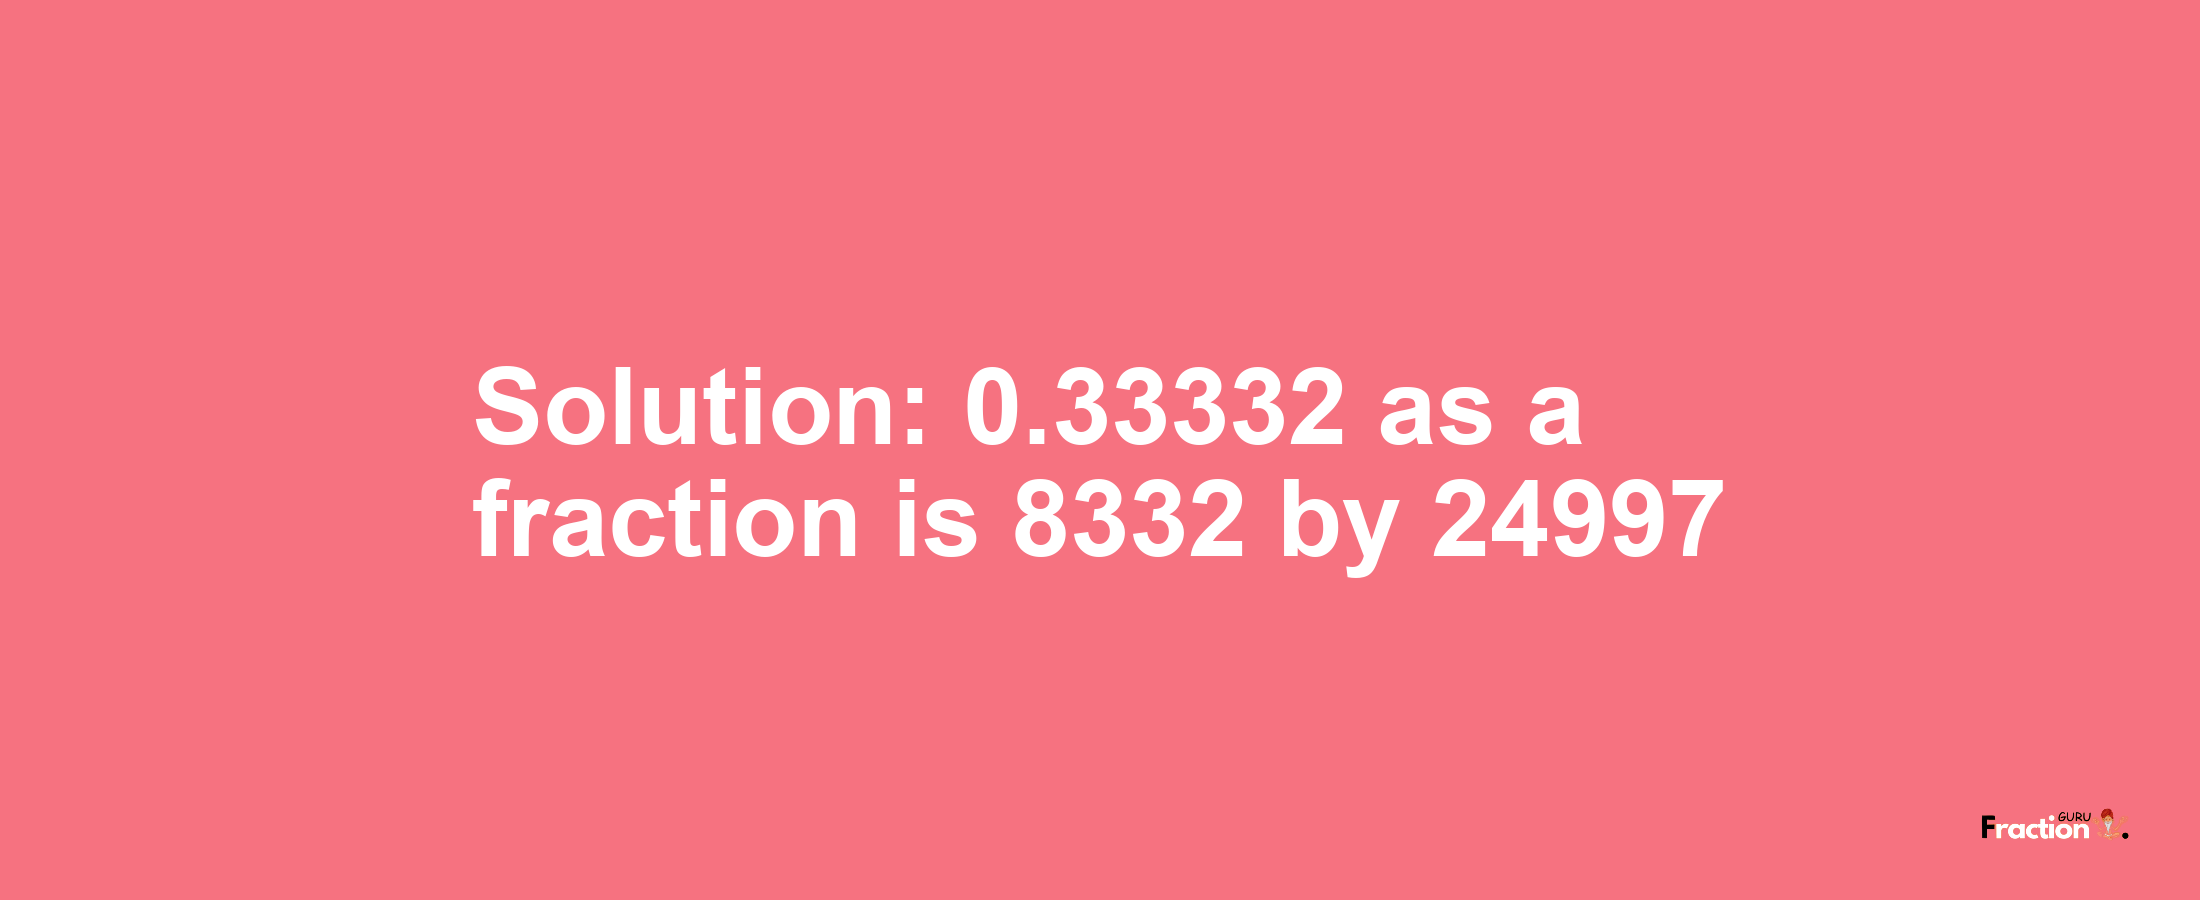 Solution:0.33332 as a fraction is 8332/24997